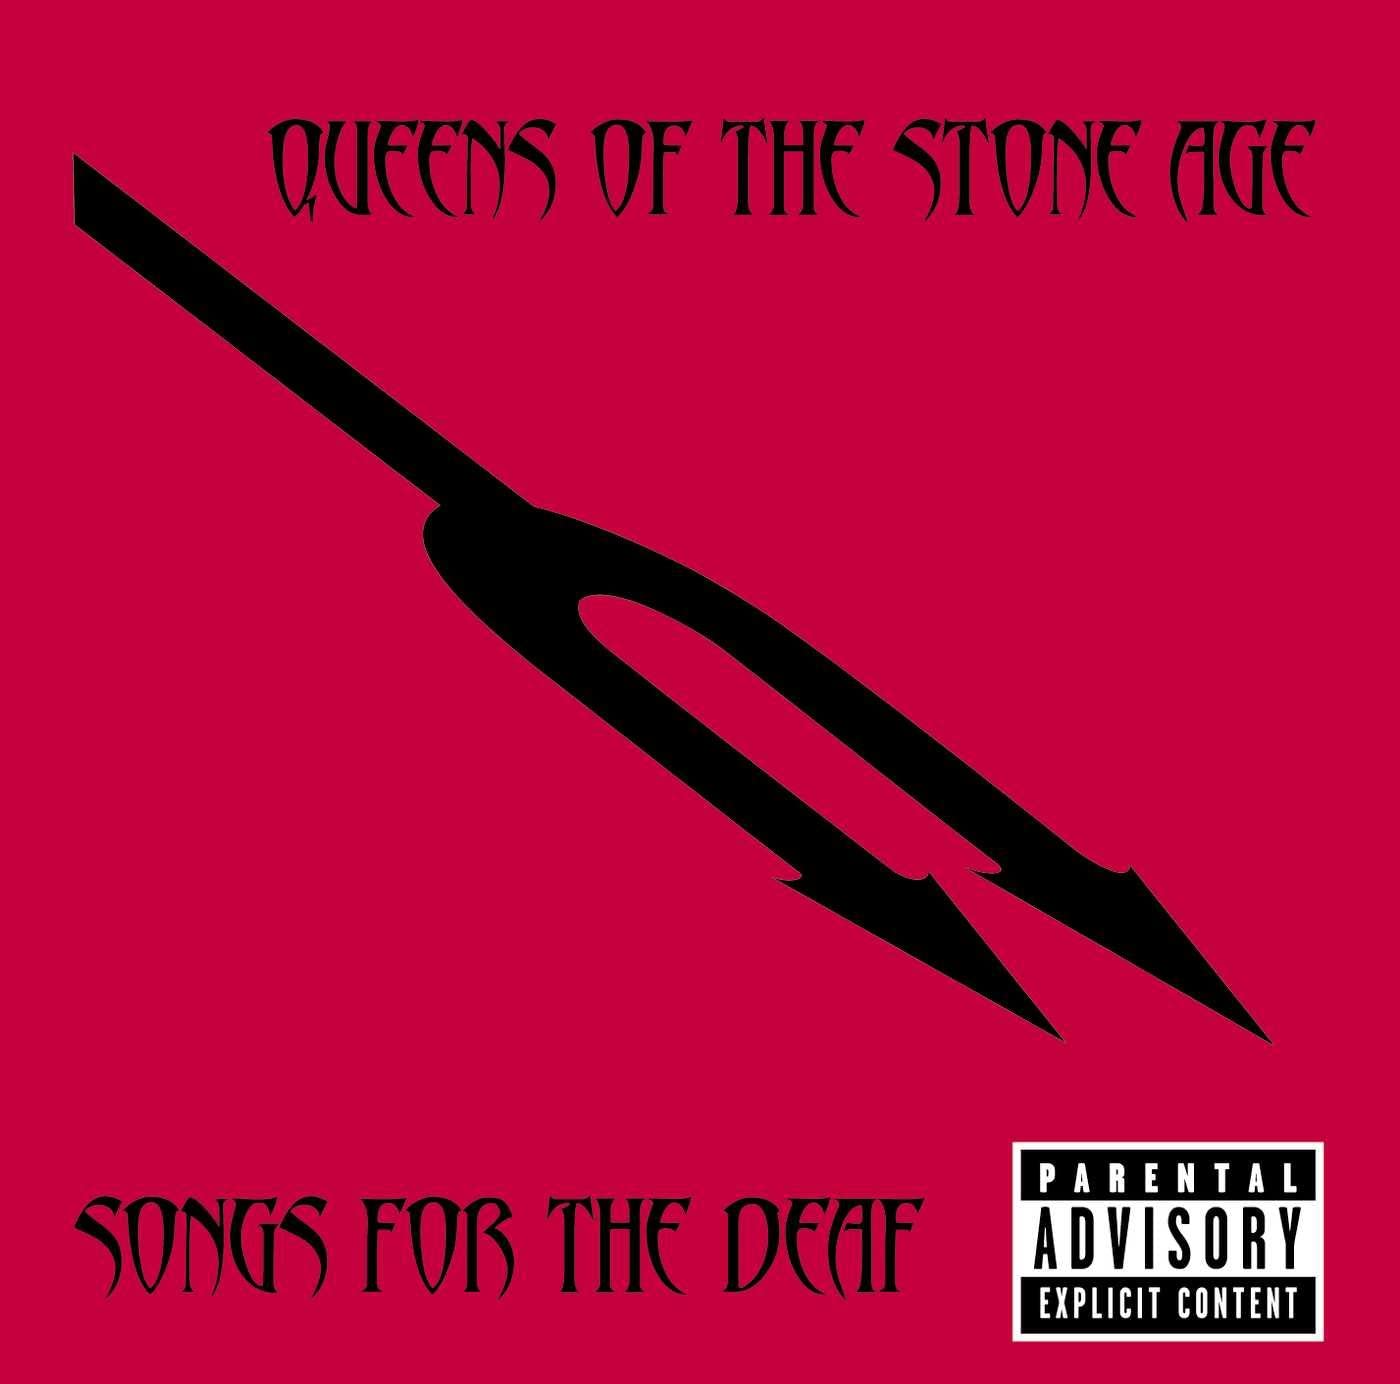 QueensOftheStoneAge_SongsForTheDeaf